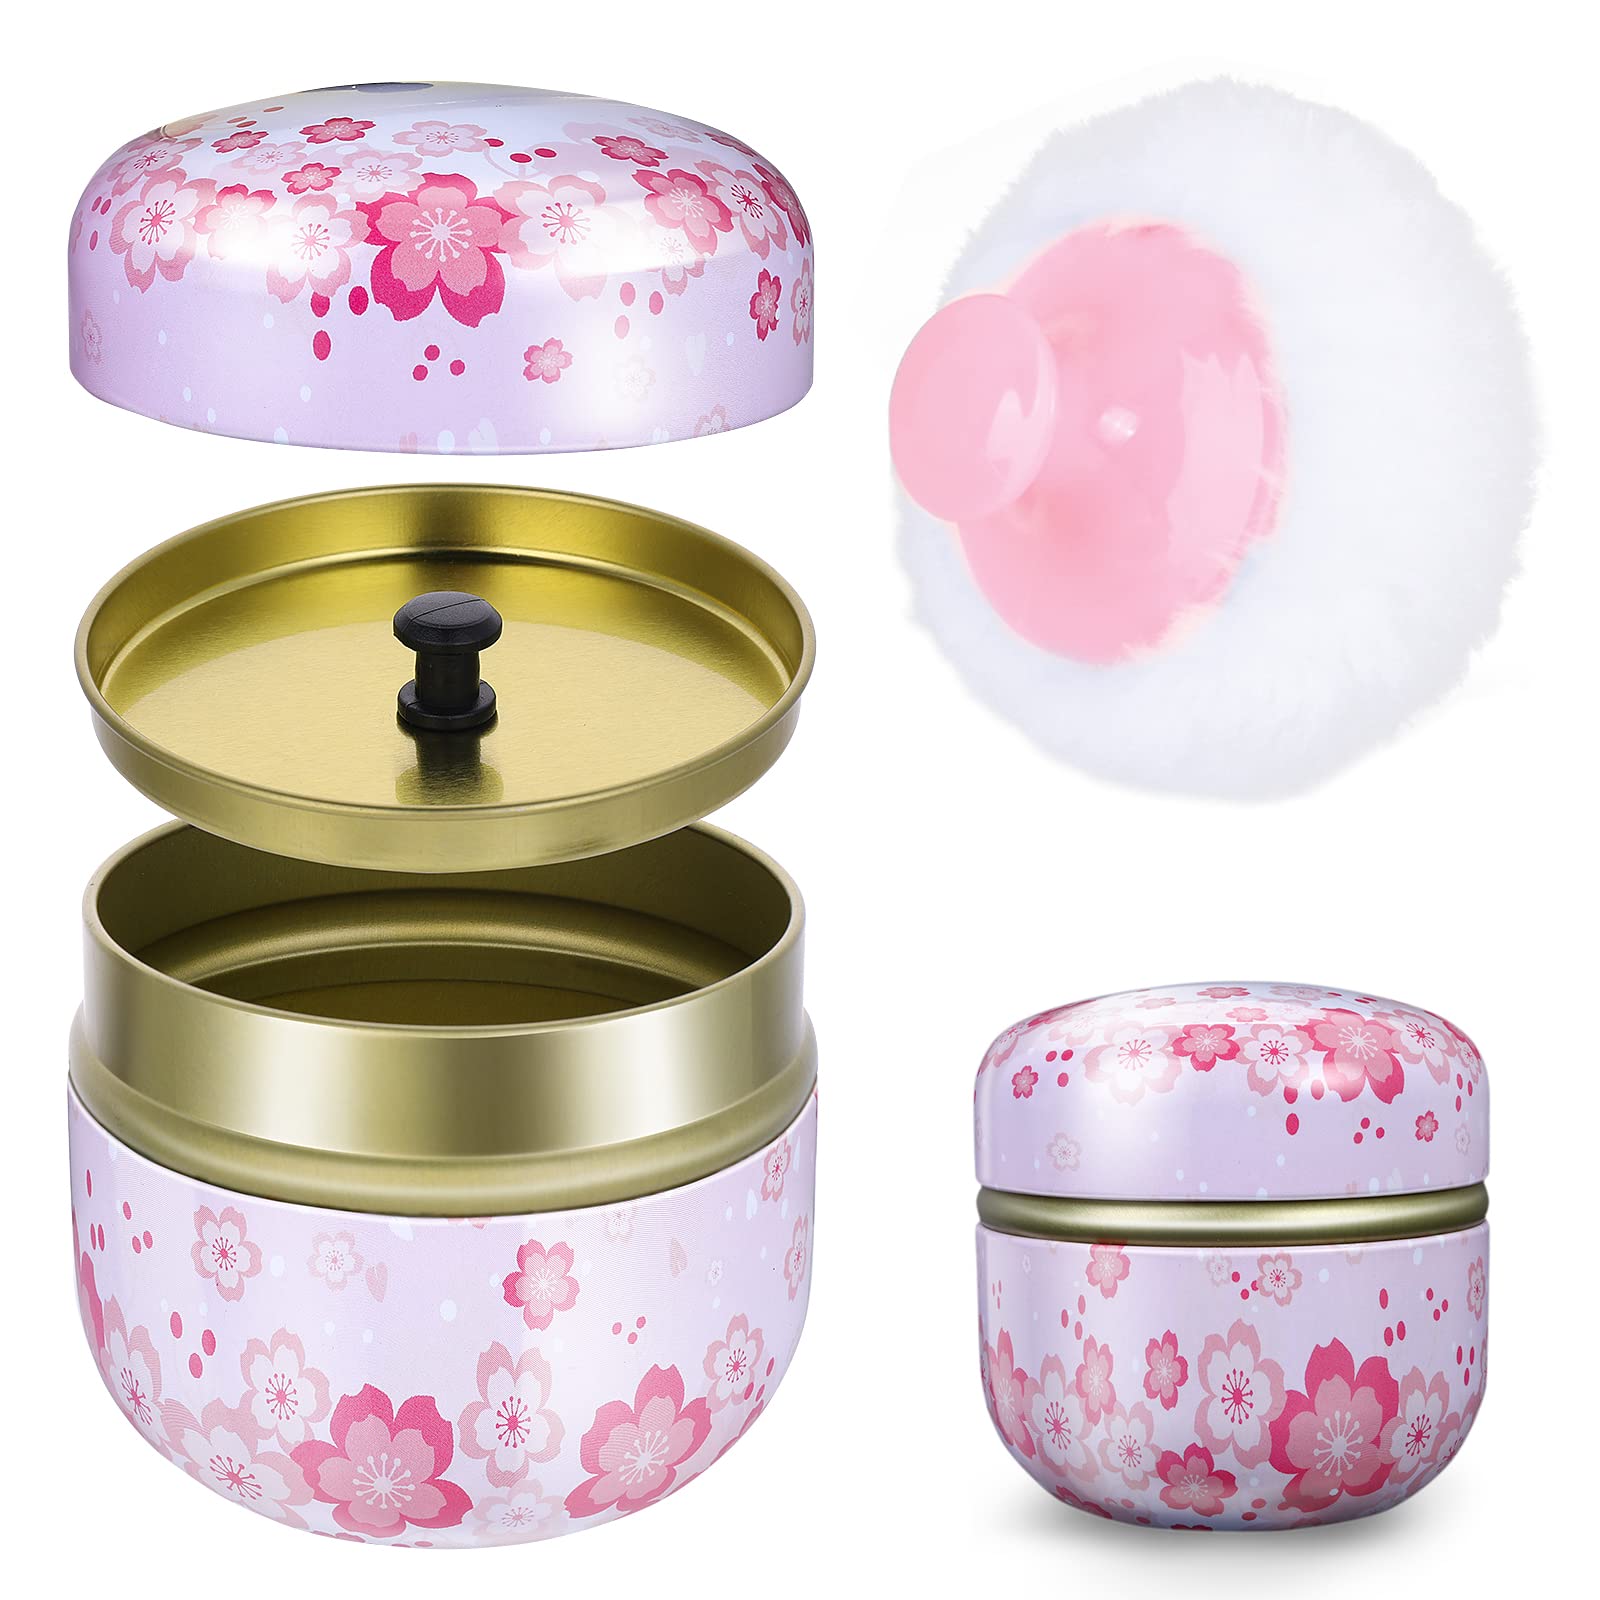 Sibba Powder Case with Powder Puff for Body Powder Empty Container Dusting Powder Box Baby After Bath Powder Puff Kit Makeup Powder Dispenser Case (Pink)